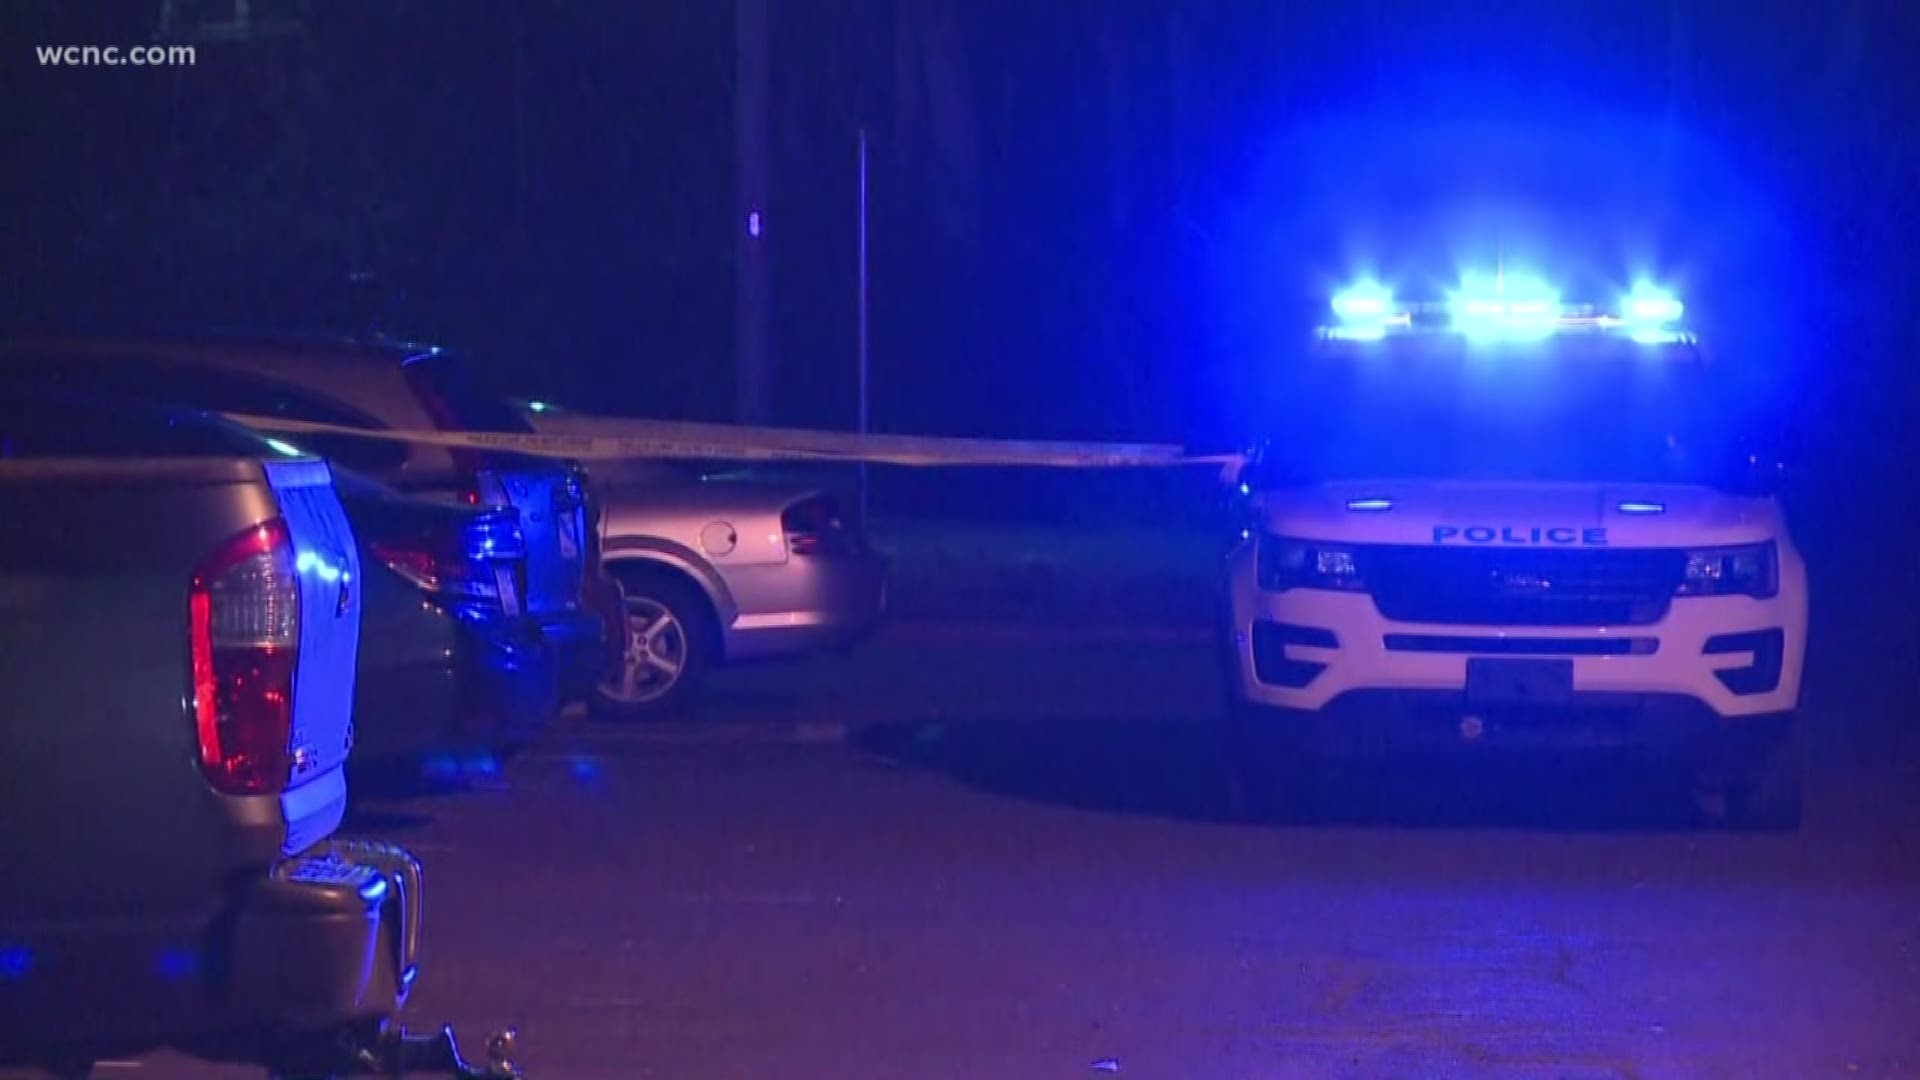 A teenager was hurt after getting shot at an apartment complex in southeast Charlotte early Monday.